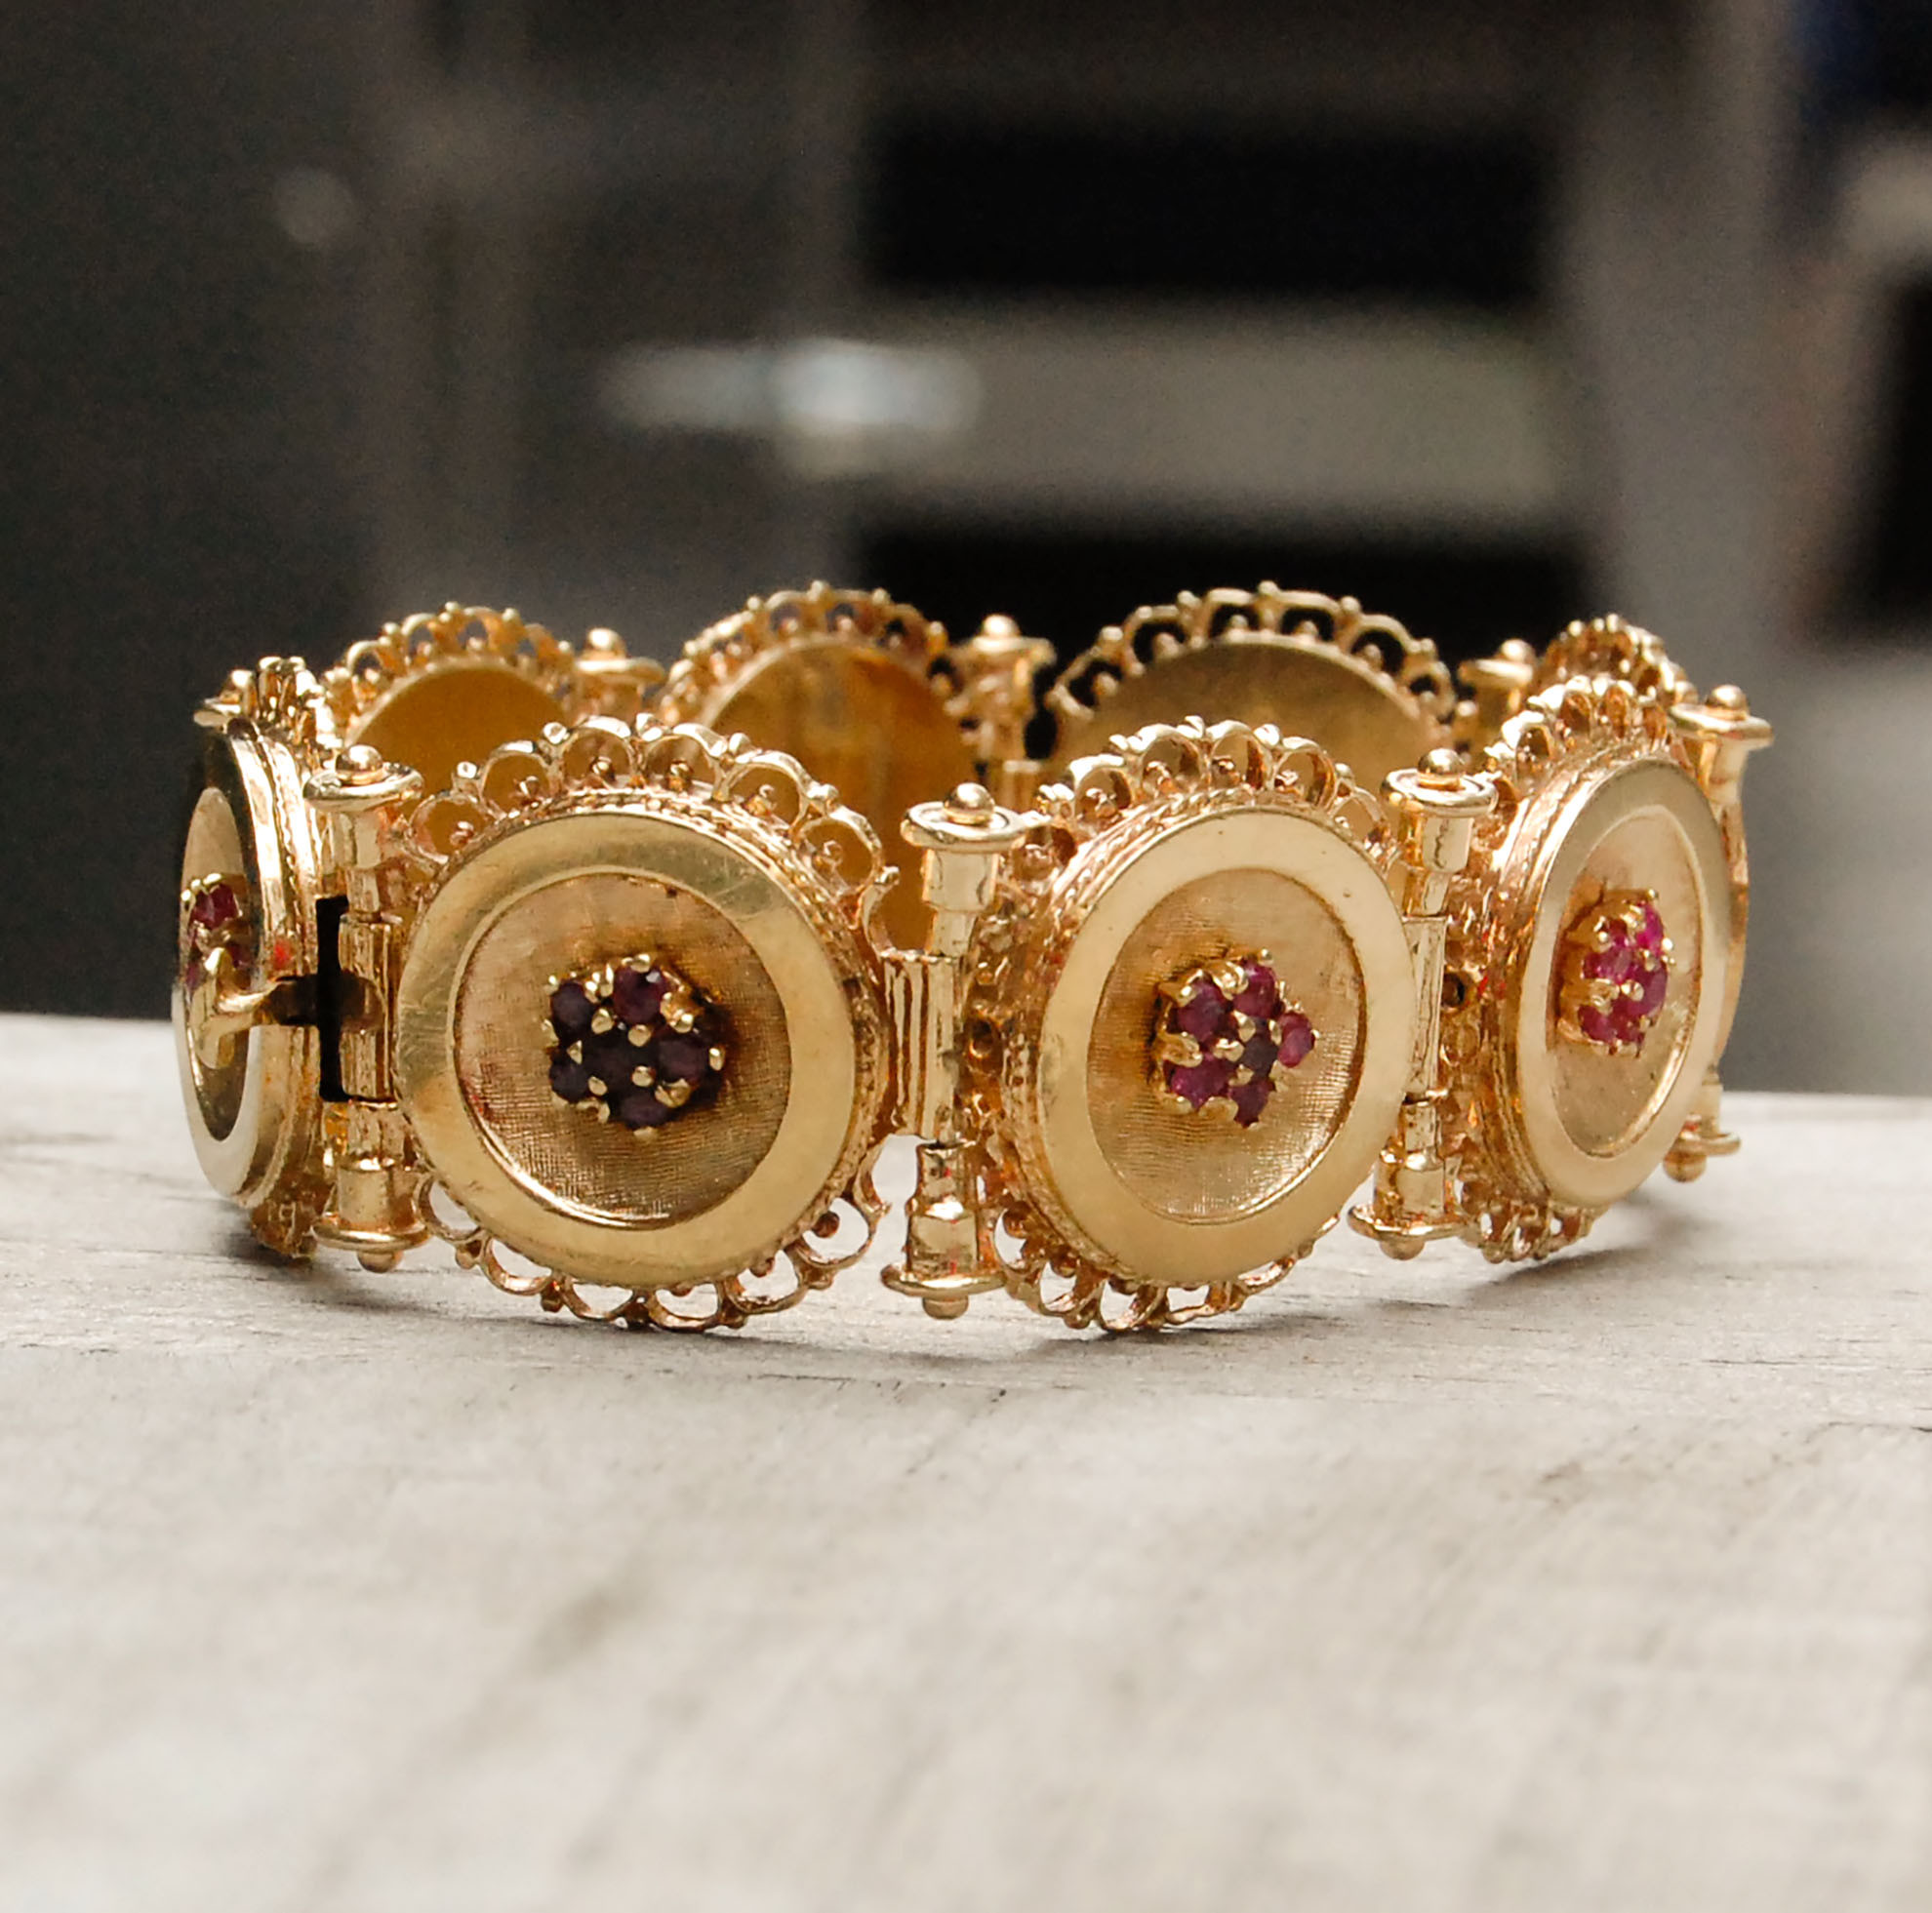 Vintage Gold Ruby Flower Bracelet on Antique Mounting — Lifestyle with Lynn